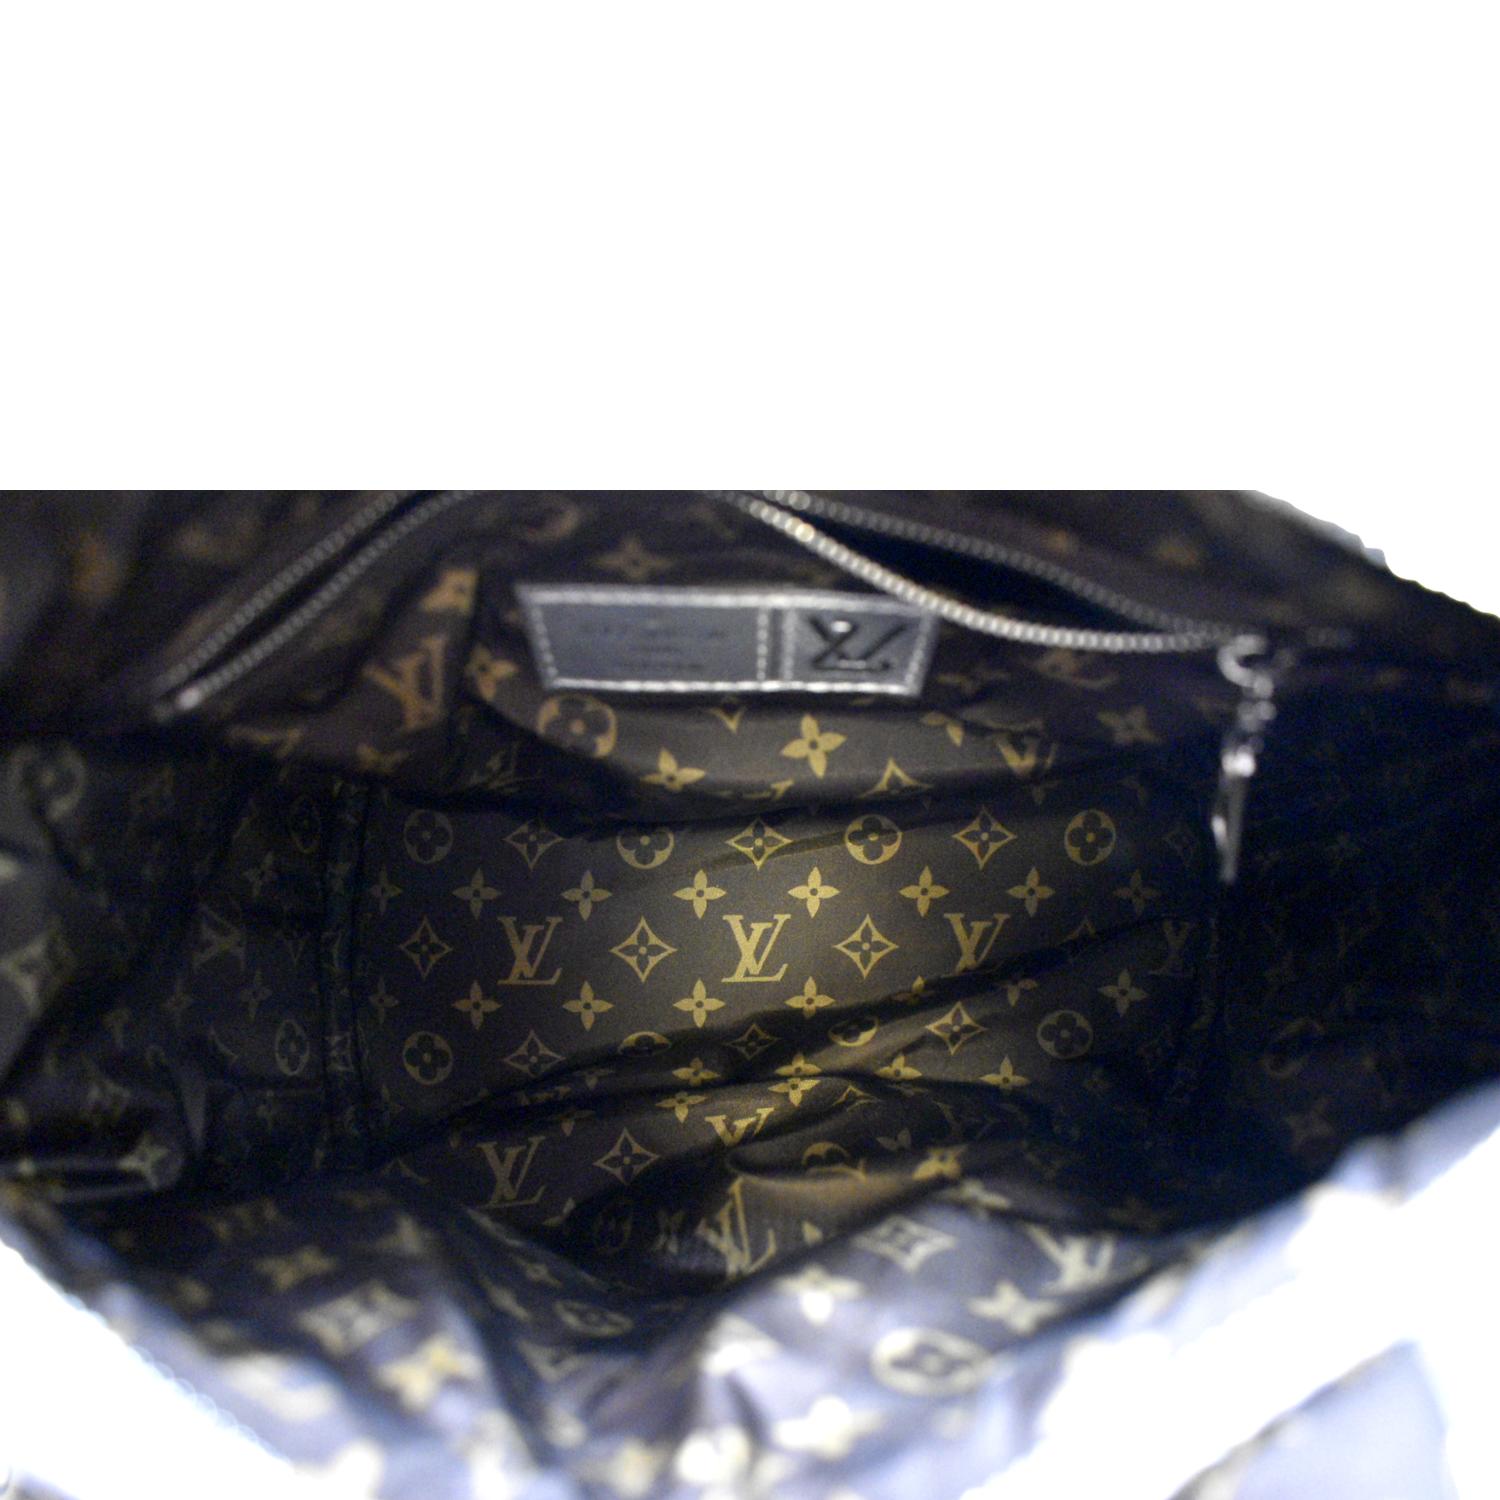 Louis Vuitton LV Pillow Backpack Black in Econyl/Coated Canvas